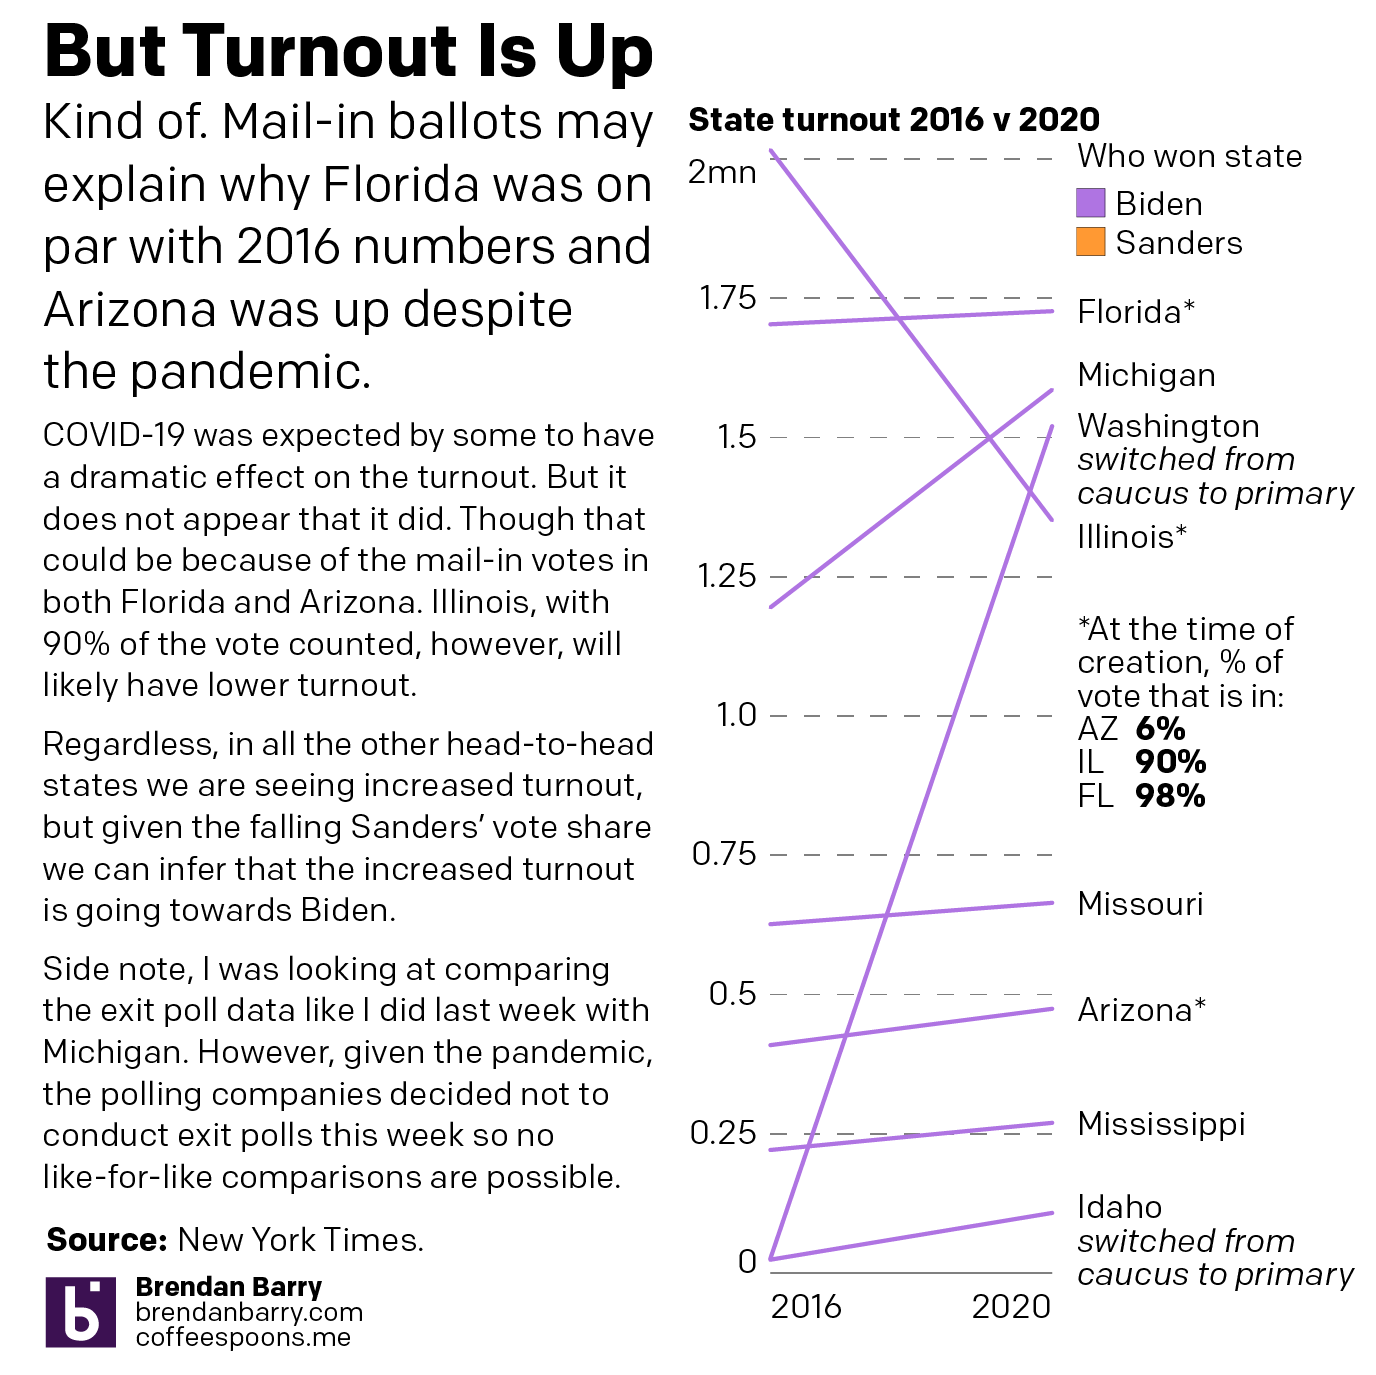 Turnout is generally up in all the head-to-head states.